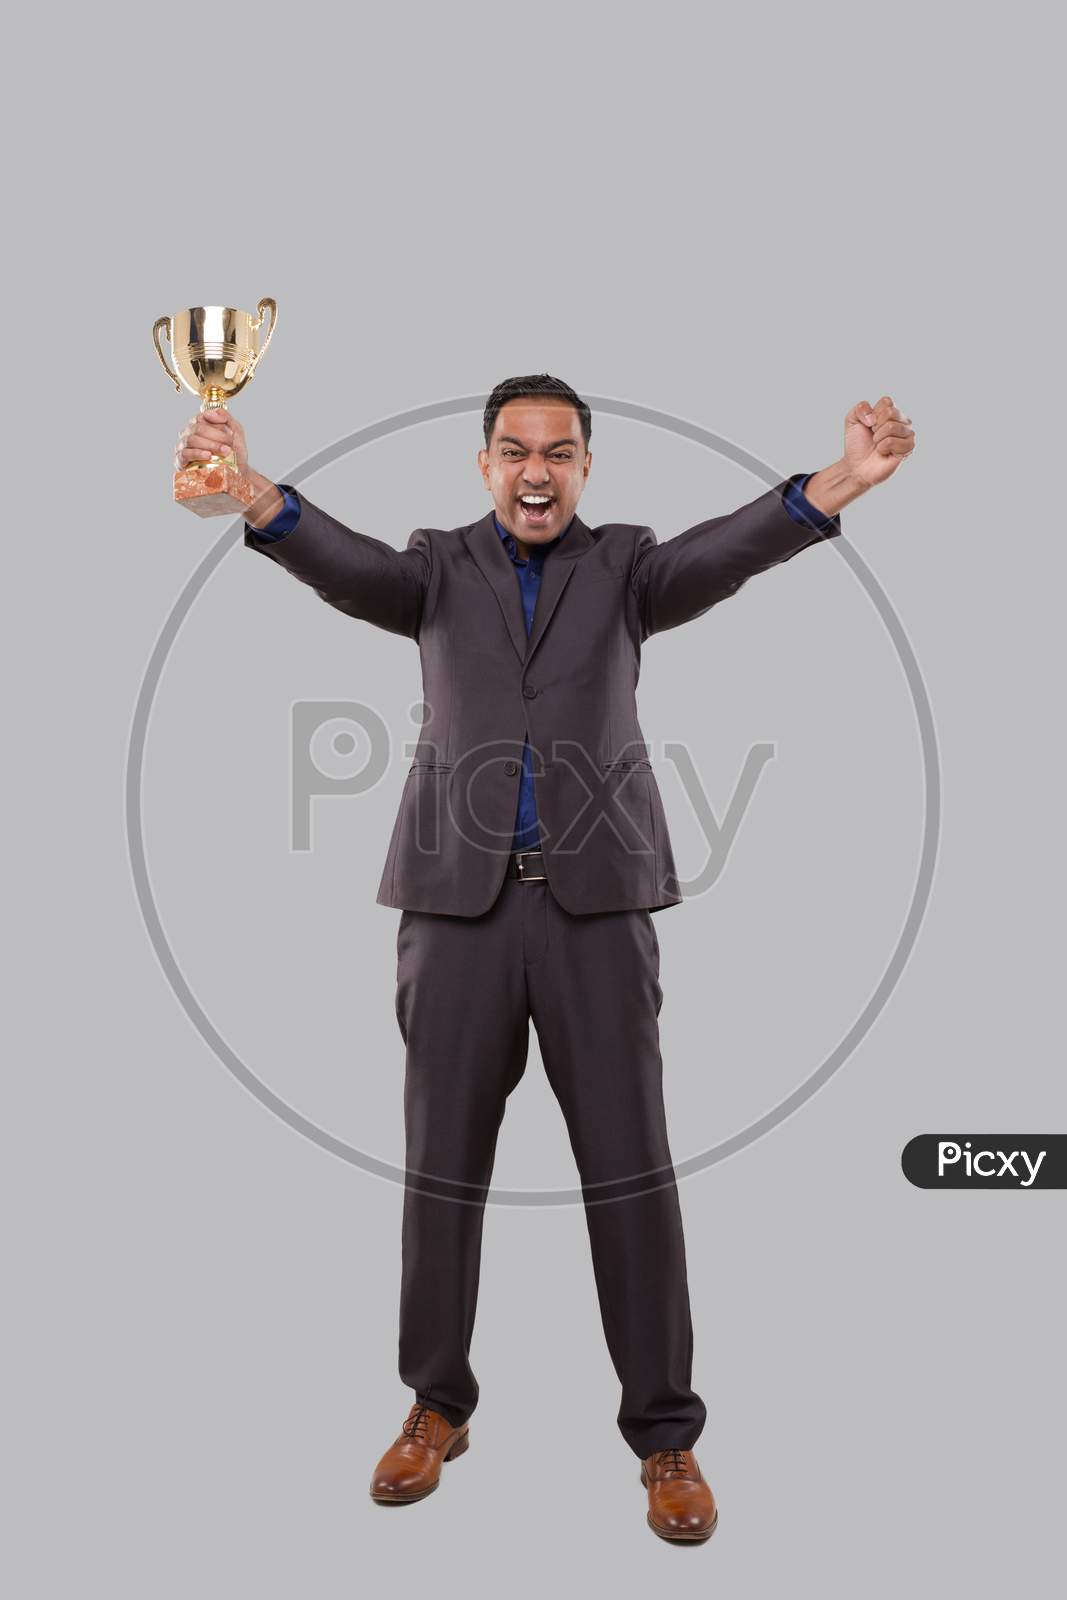 Businessman Very Happy And Excited, Raising Arms, Celebrating A Victory Or Success Holding Trophy. Winner Sign. Indian Business Man Isolated With Trophy In Hands